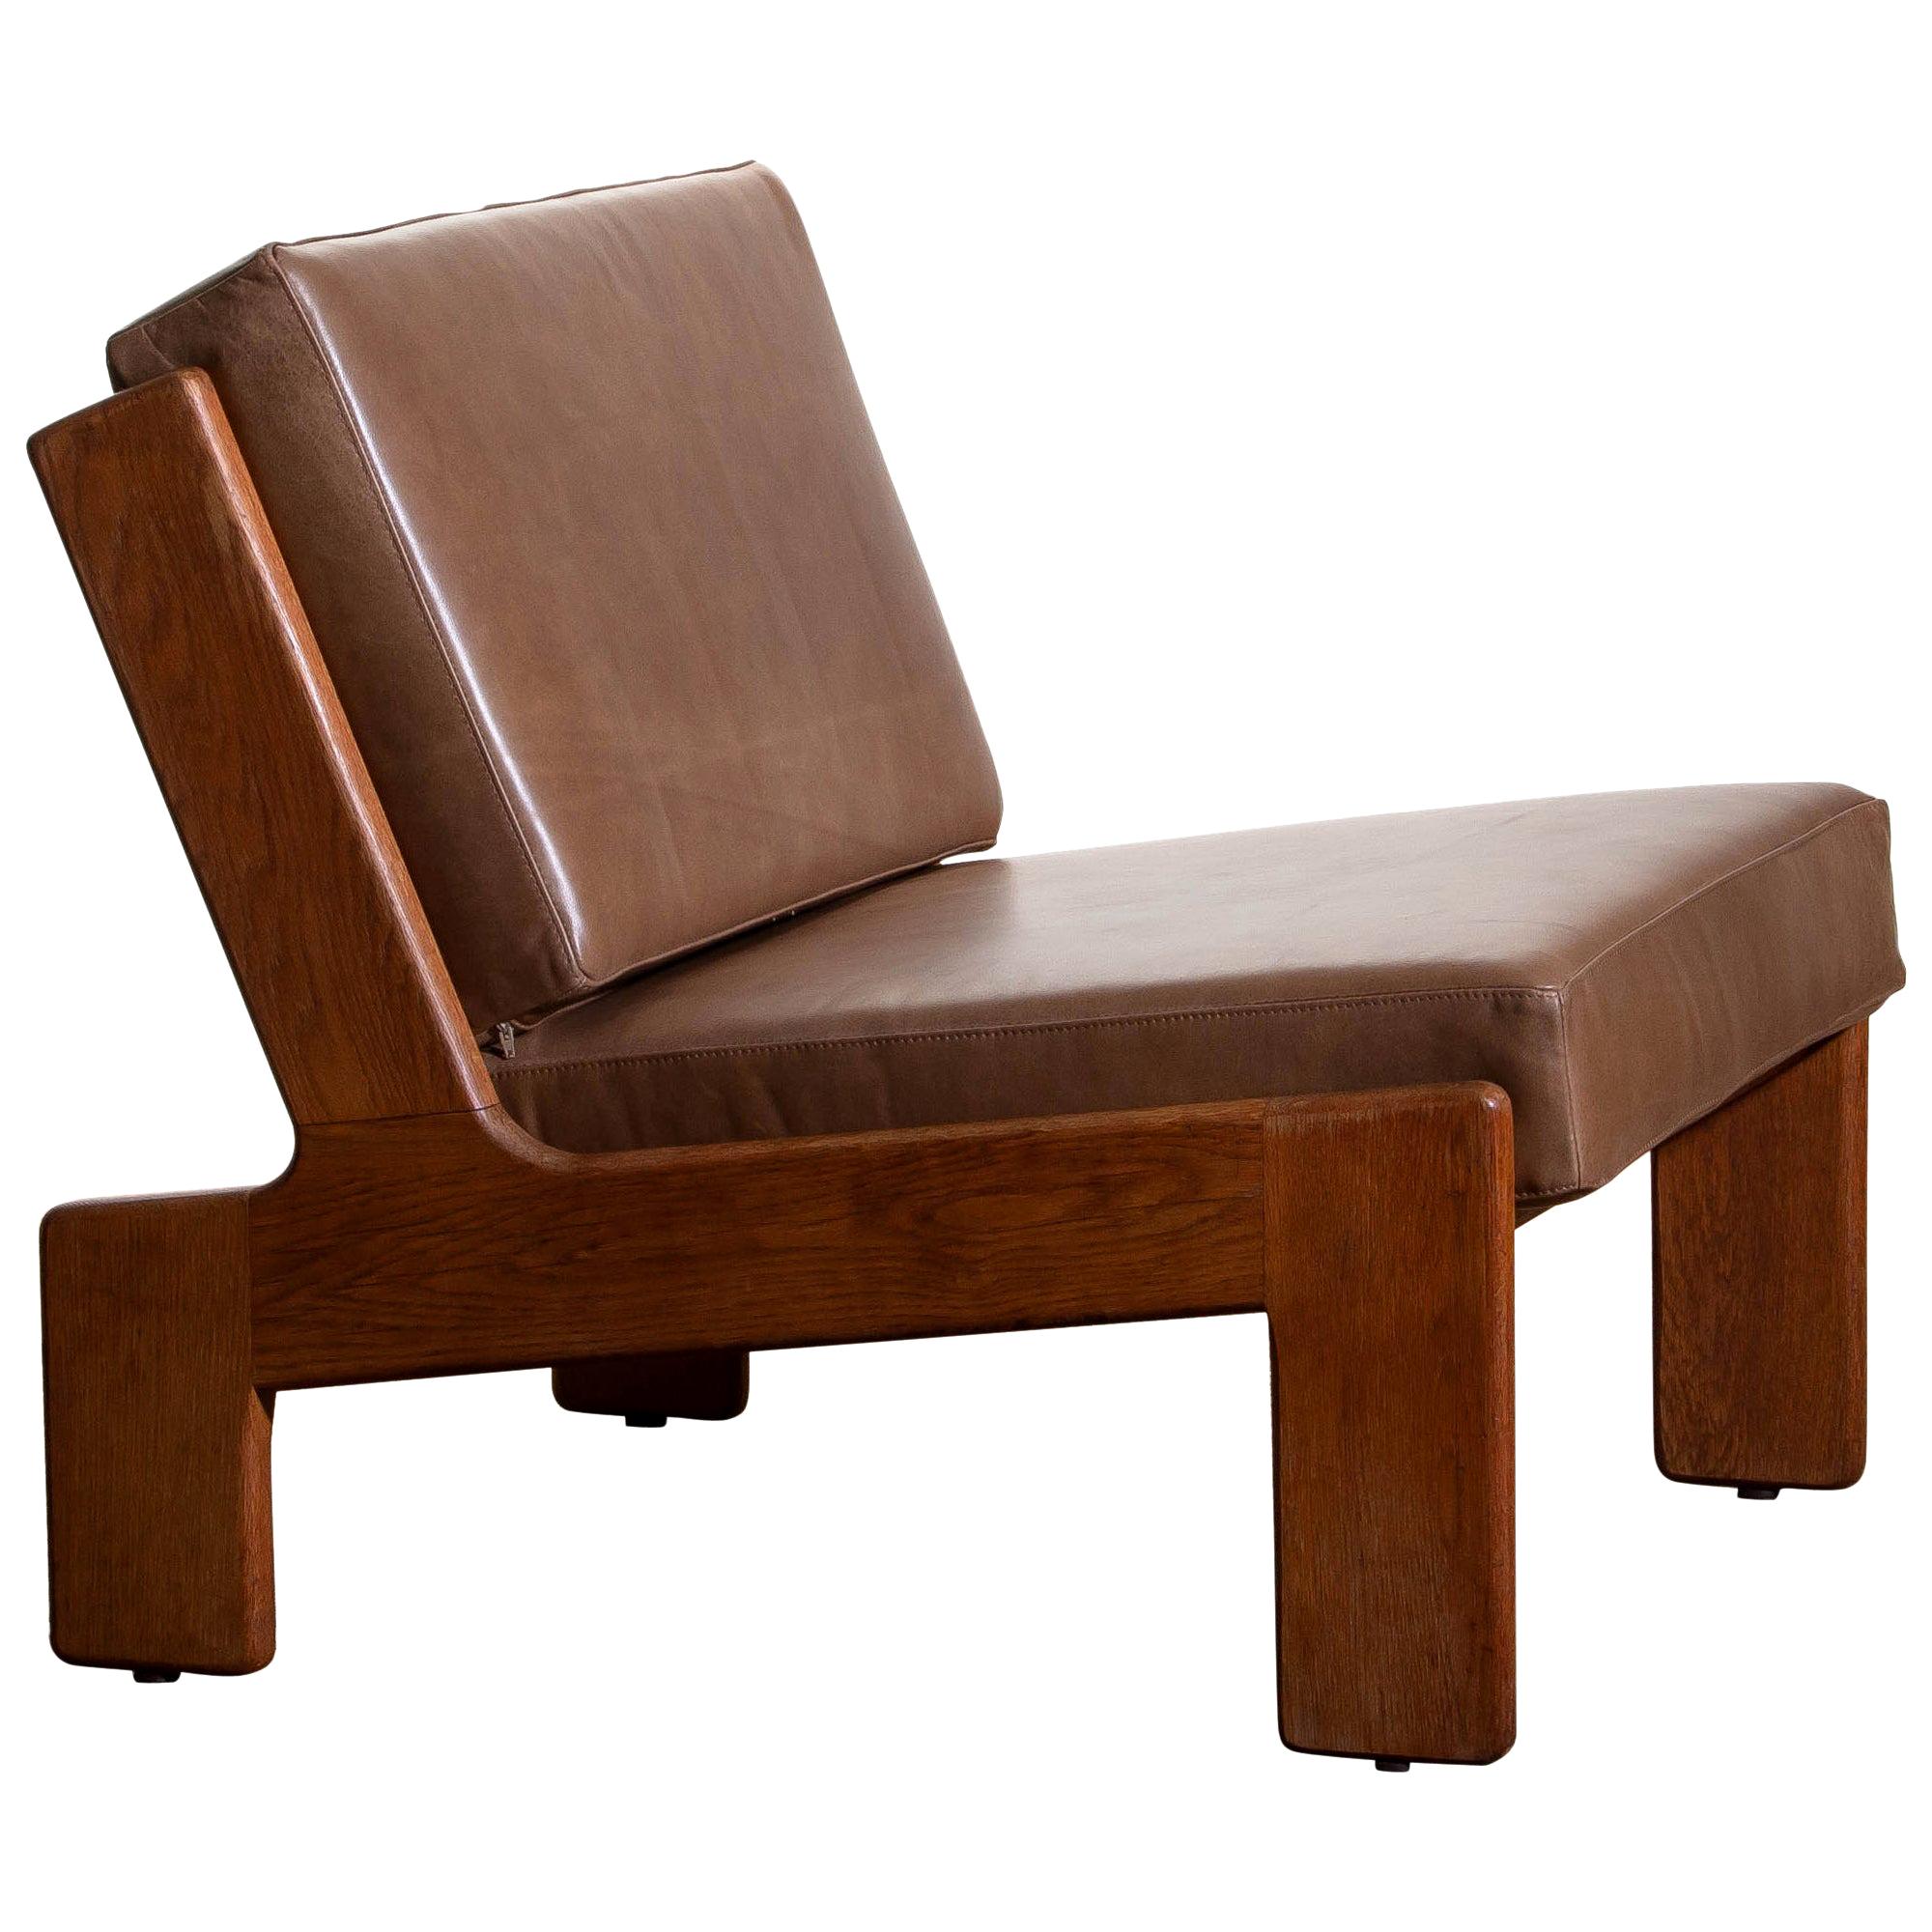 Mid-Century Modern 1960s, Oak and Leather Cubist Lounge Chair by Esko Pajamies for Asko, Finland